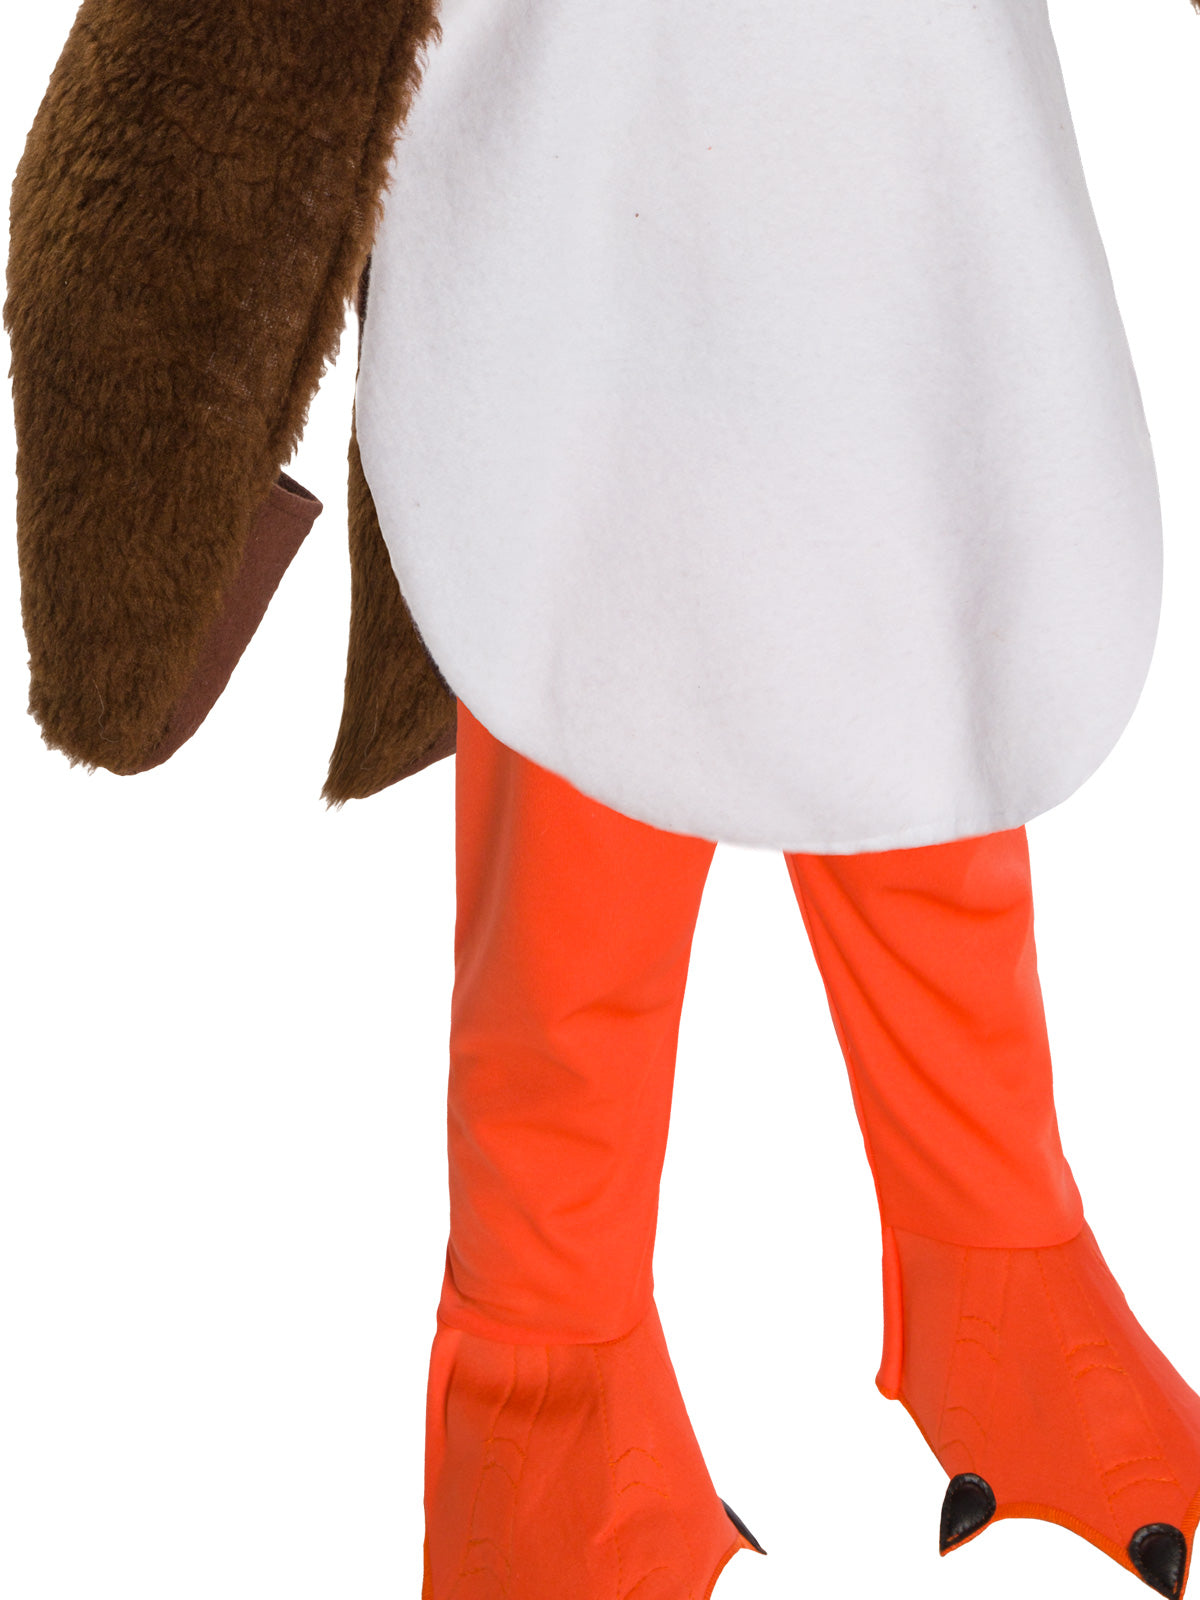 Porg Deluxe Boys Costume Extra Small